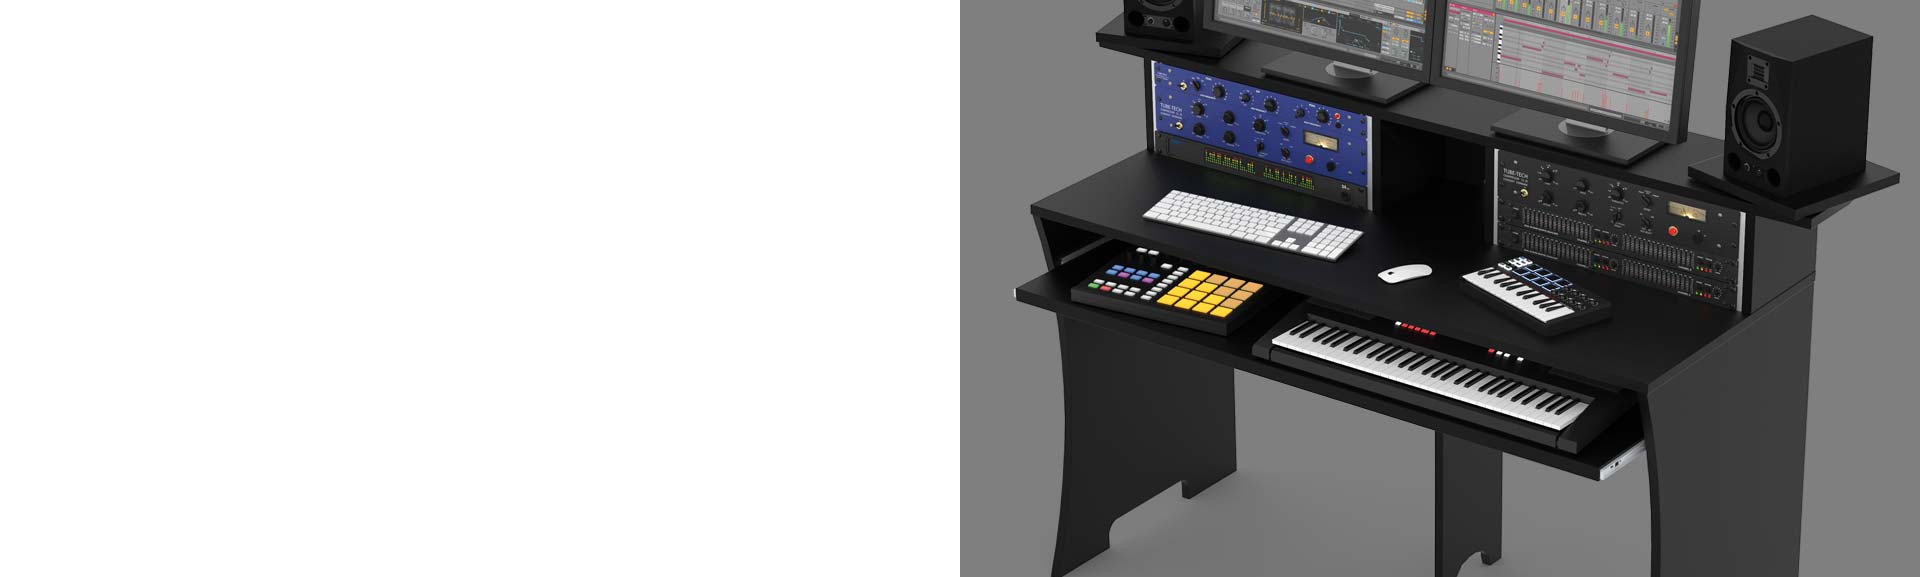 Glorious Workbench Black / Furniture for DJs, Producers and Vinyl Lovers